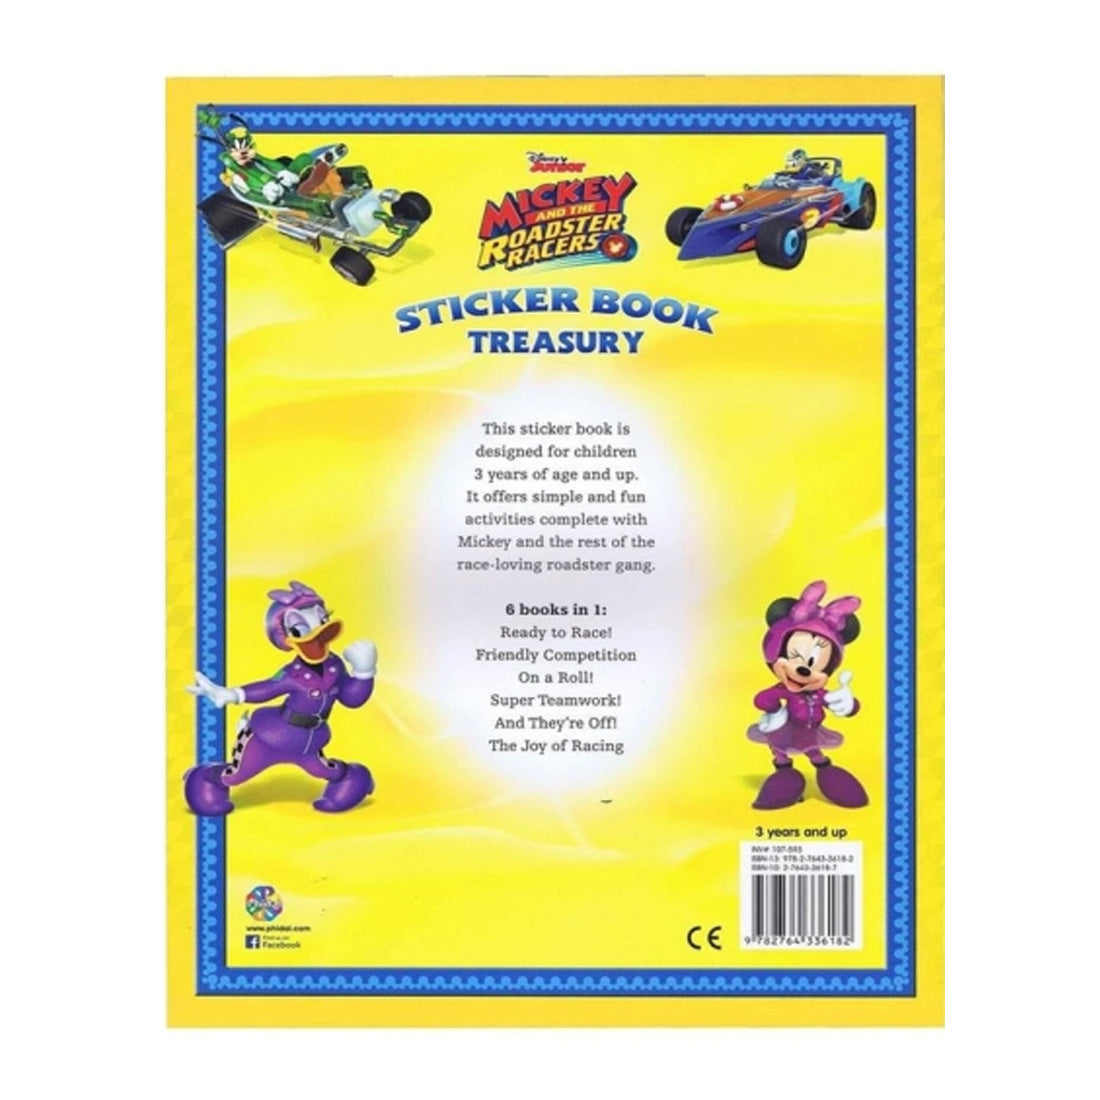 Sticker Book Treasury - Disney Mickey And The Roadster Racers